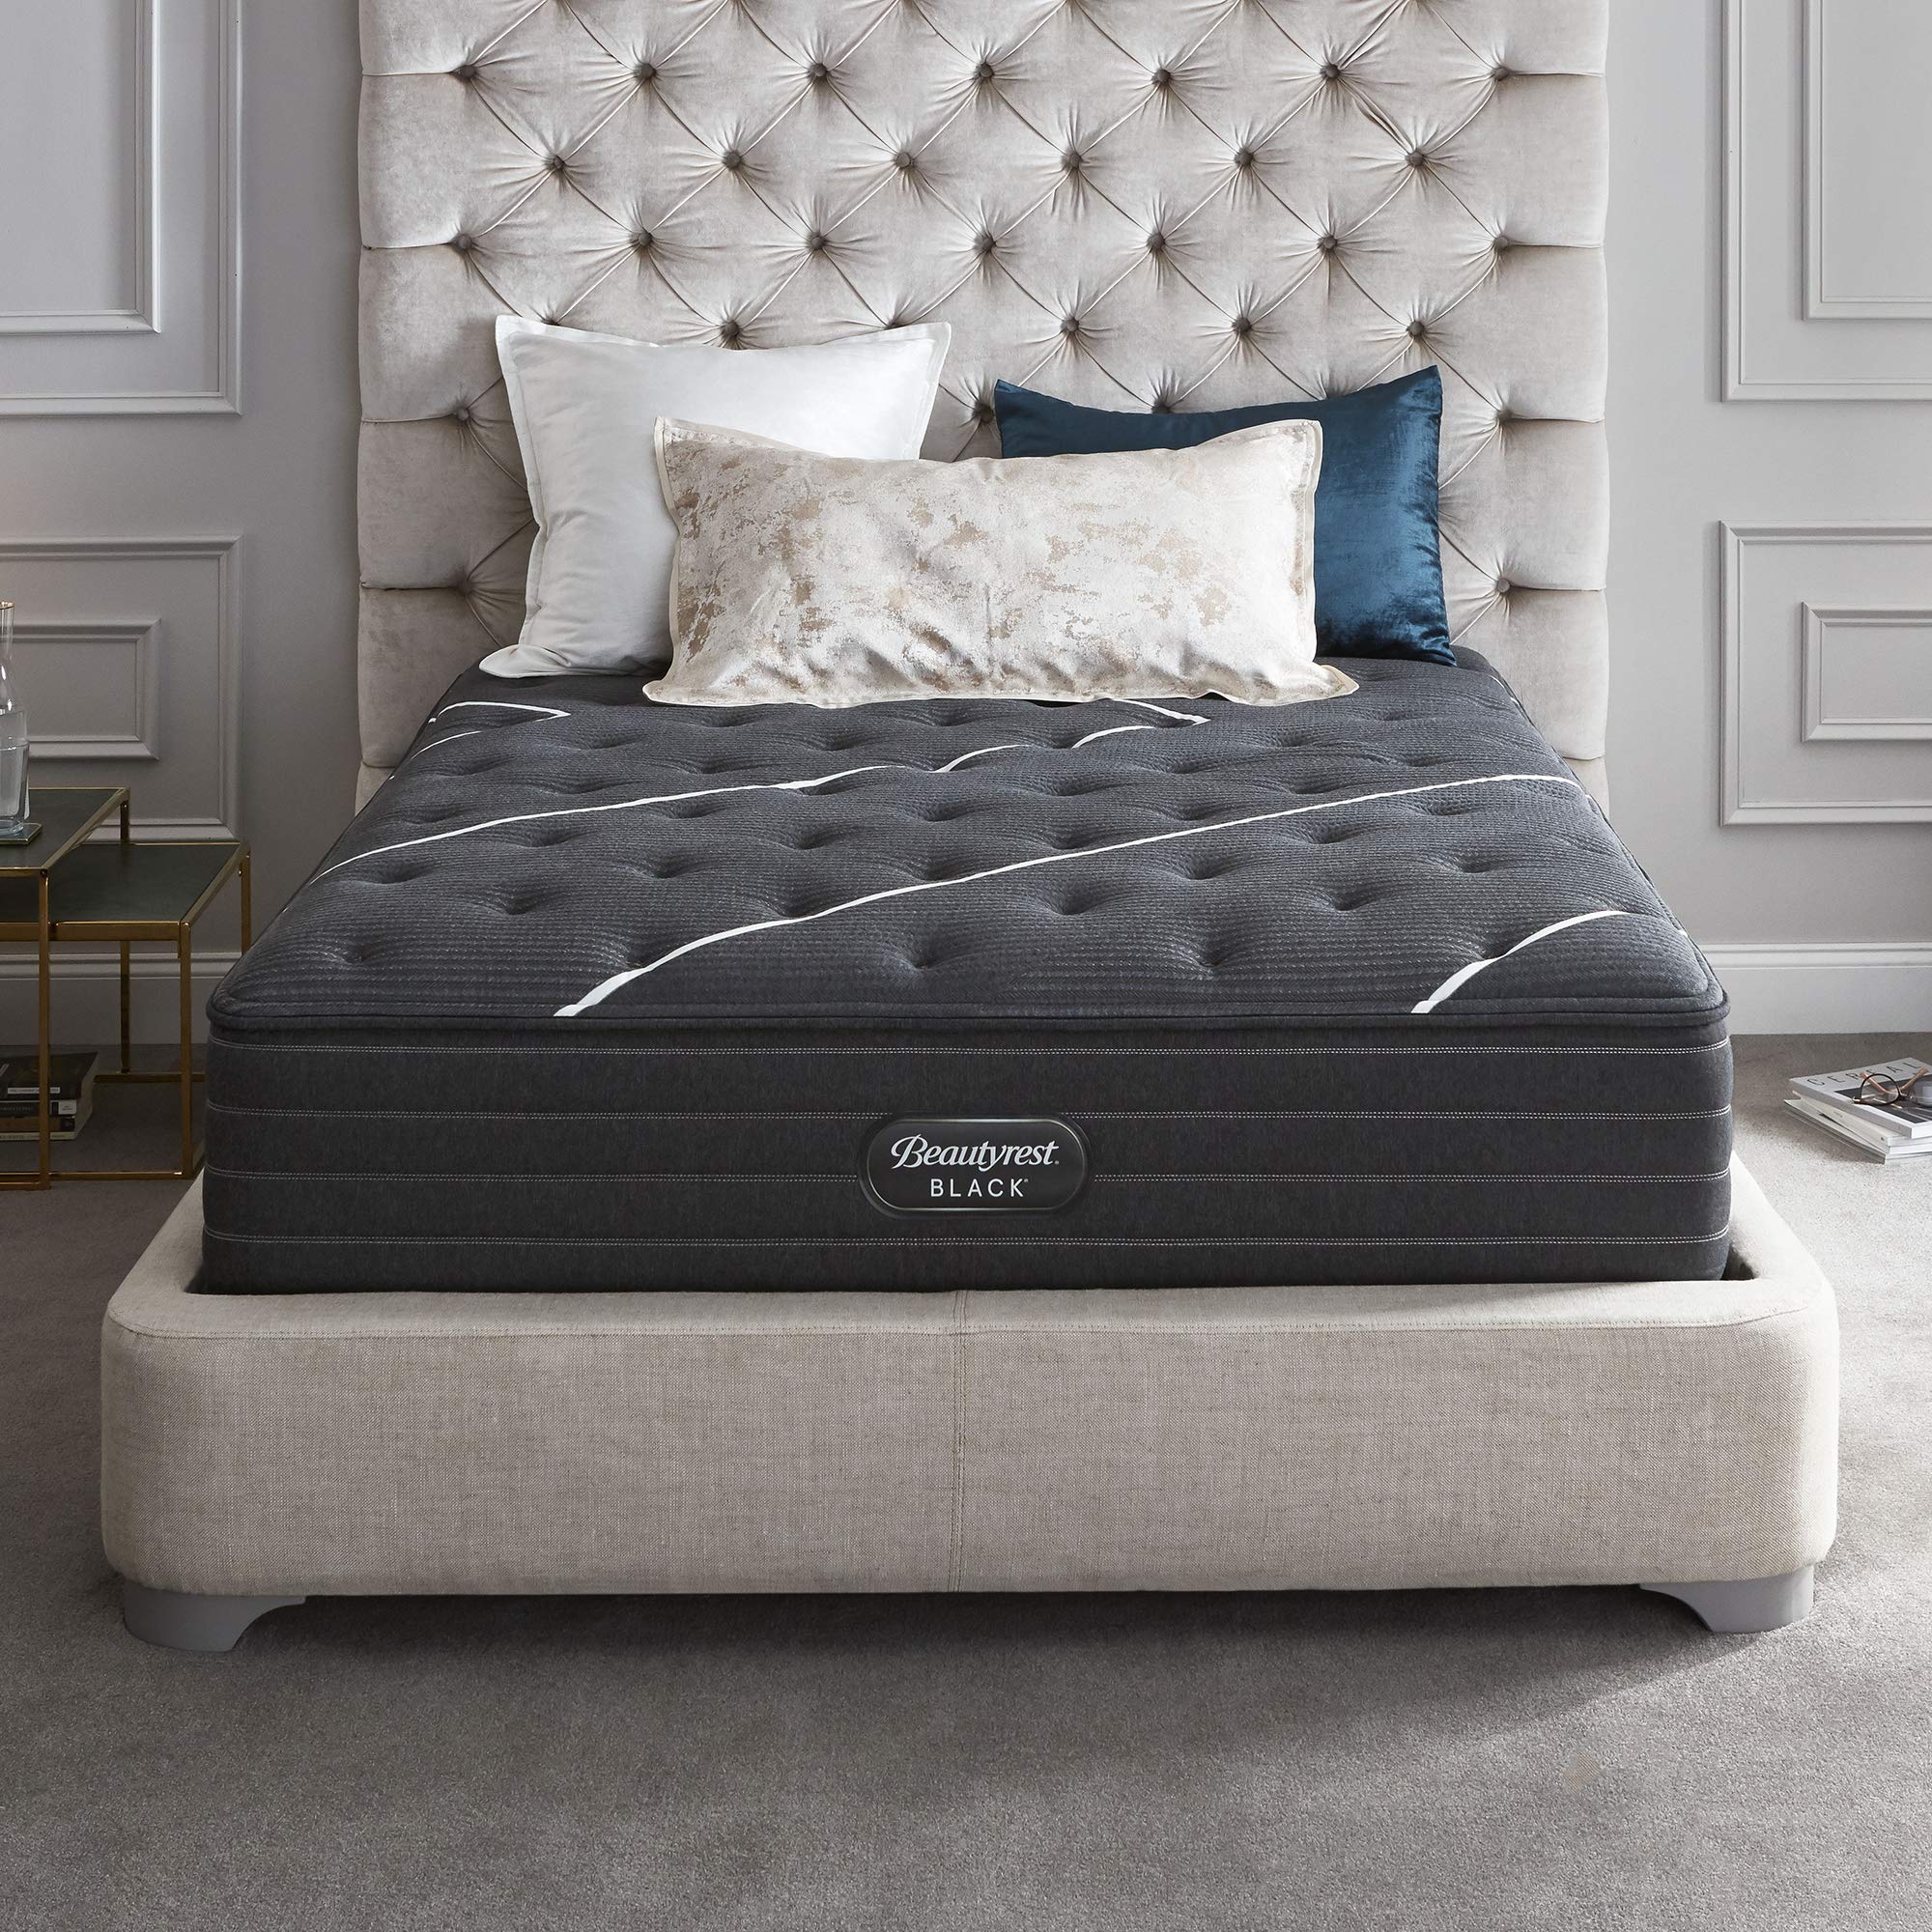 What Are Beautyrest Mattresses?